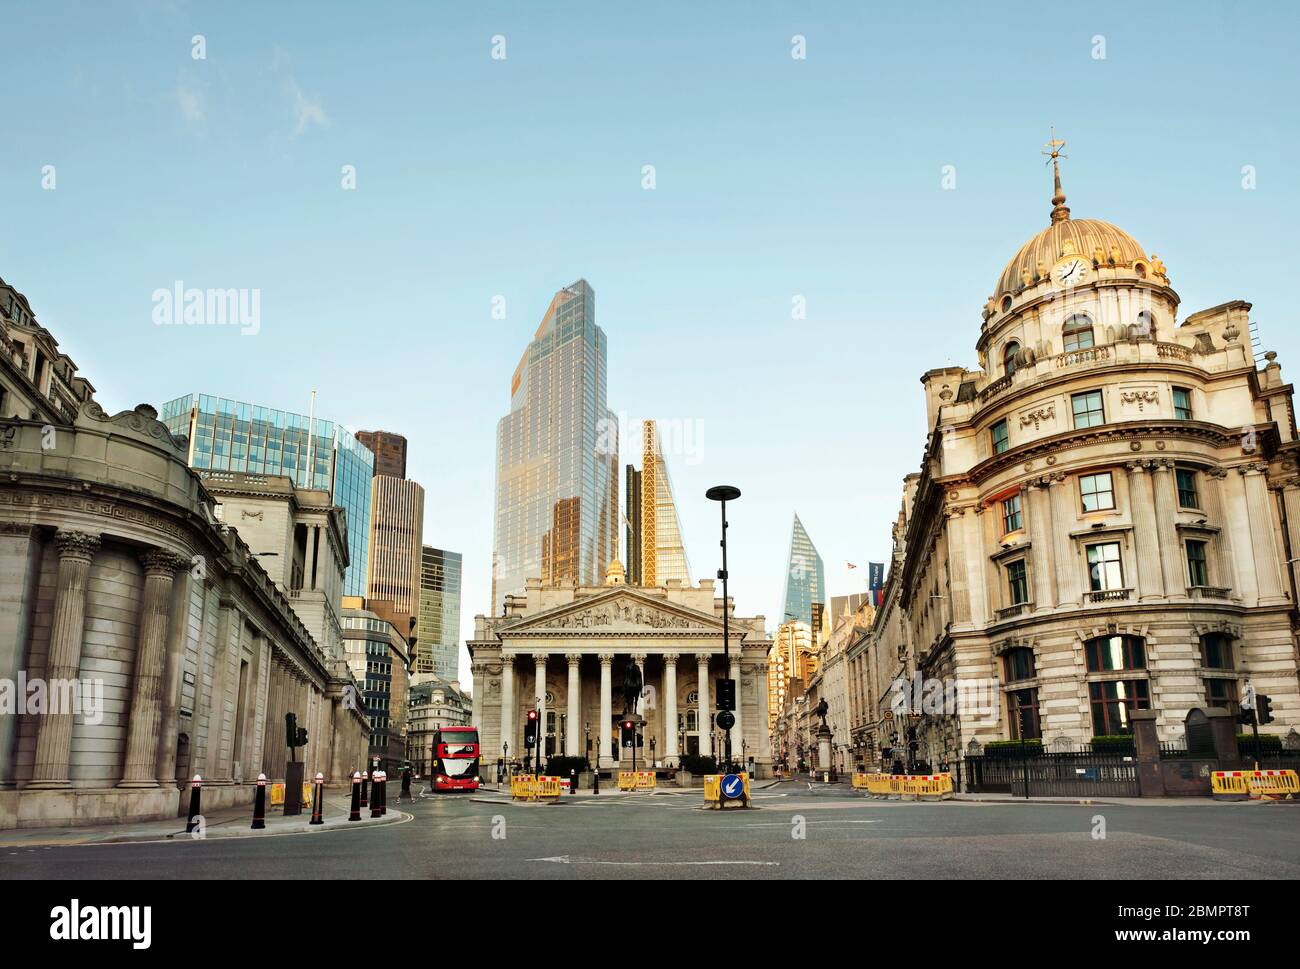 The City of London with the Bank of England (left); The Royal Exchange (centre) and No. 1 Cornhill building. Day 7 of the lockdown, London, Mar 2020 Stock Photo